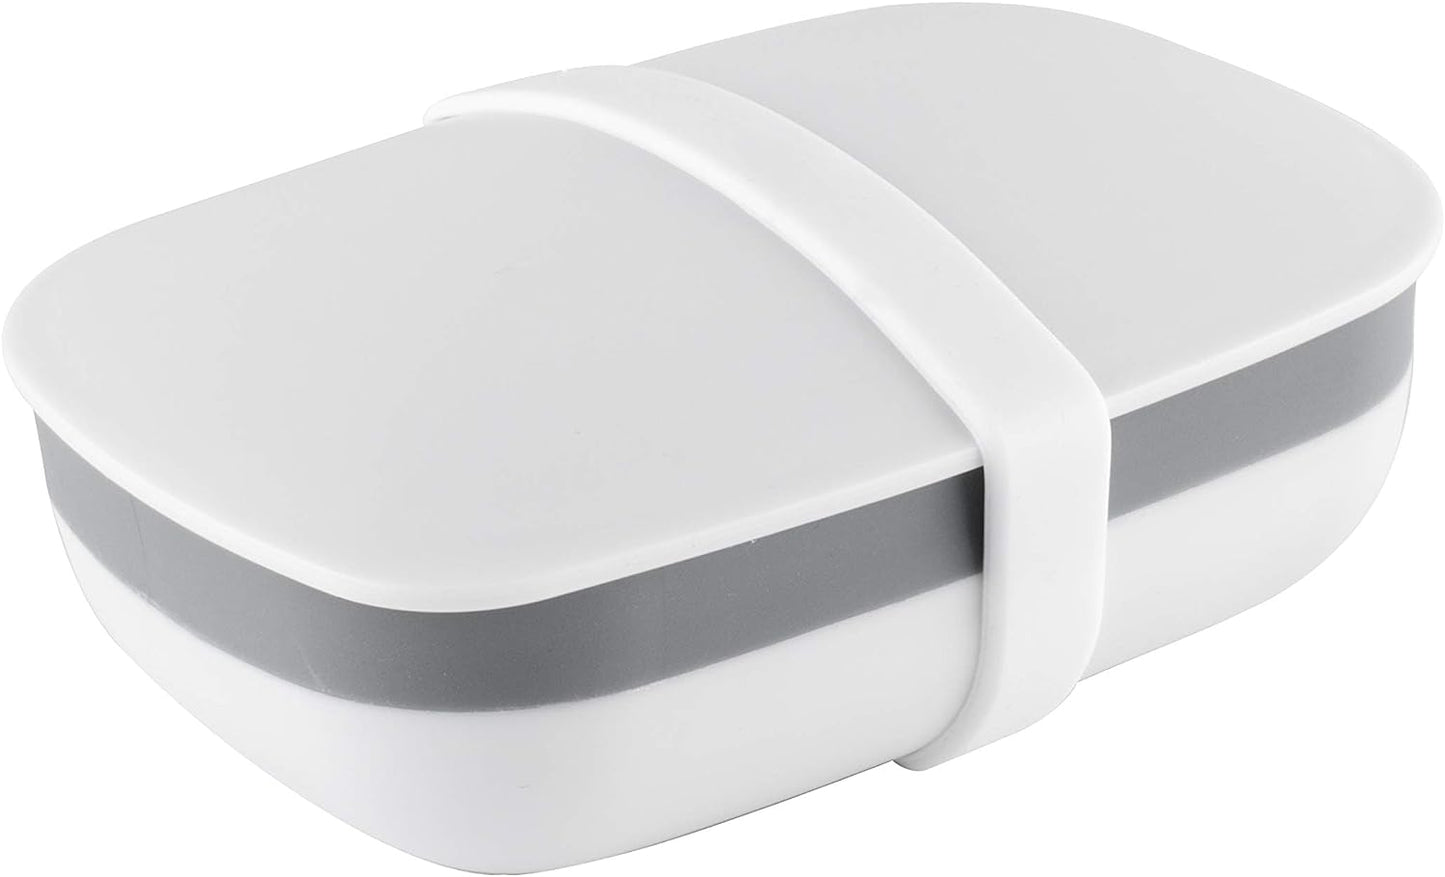 Number #1 Travel Soap Case Box Holder with Strong Sealing, Portable Leak Proof - White